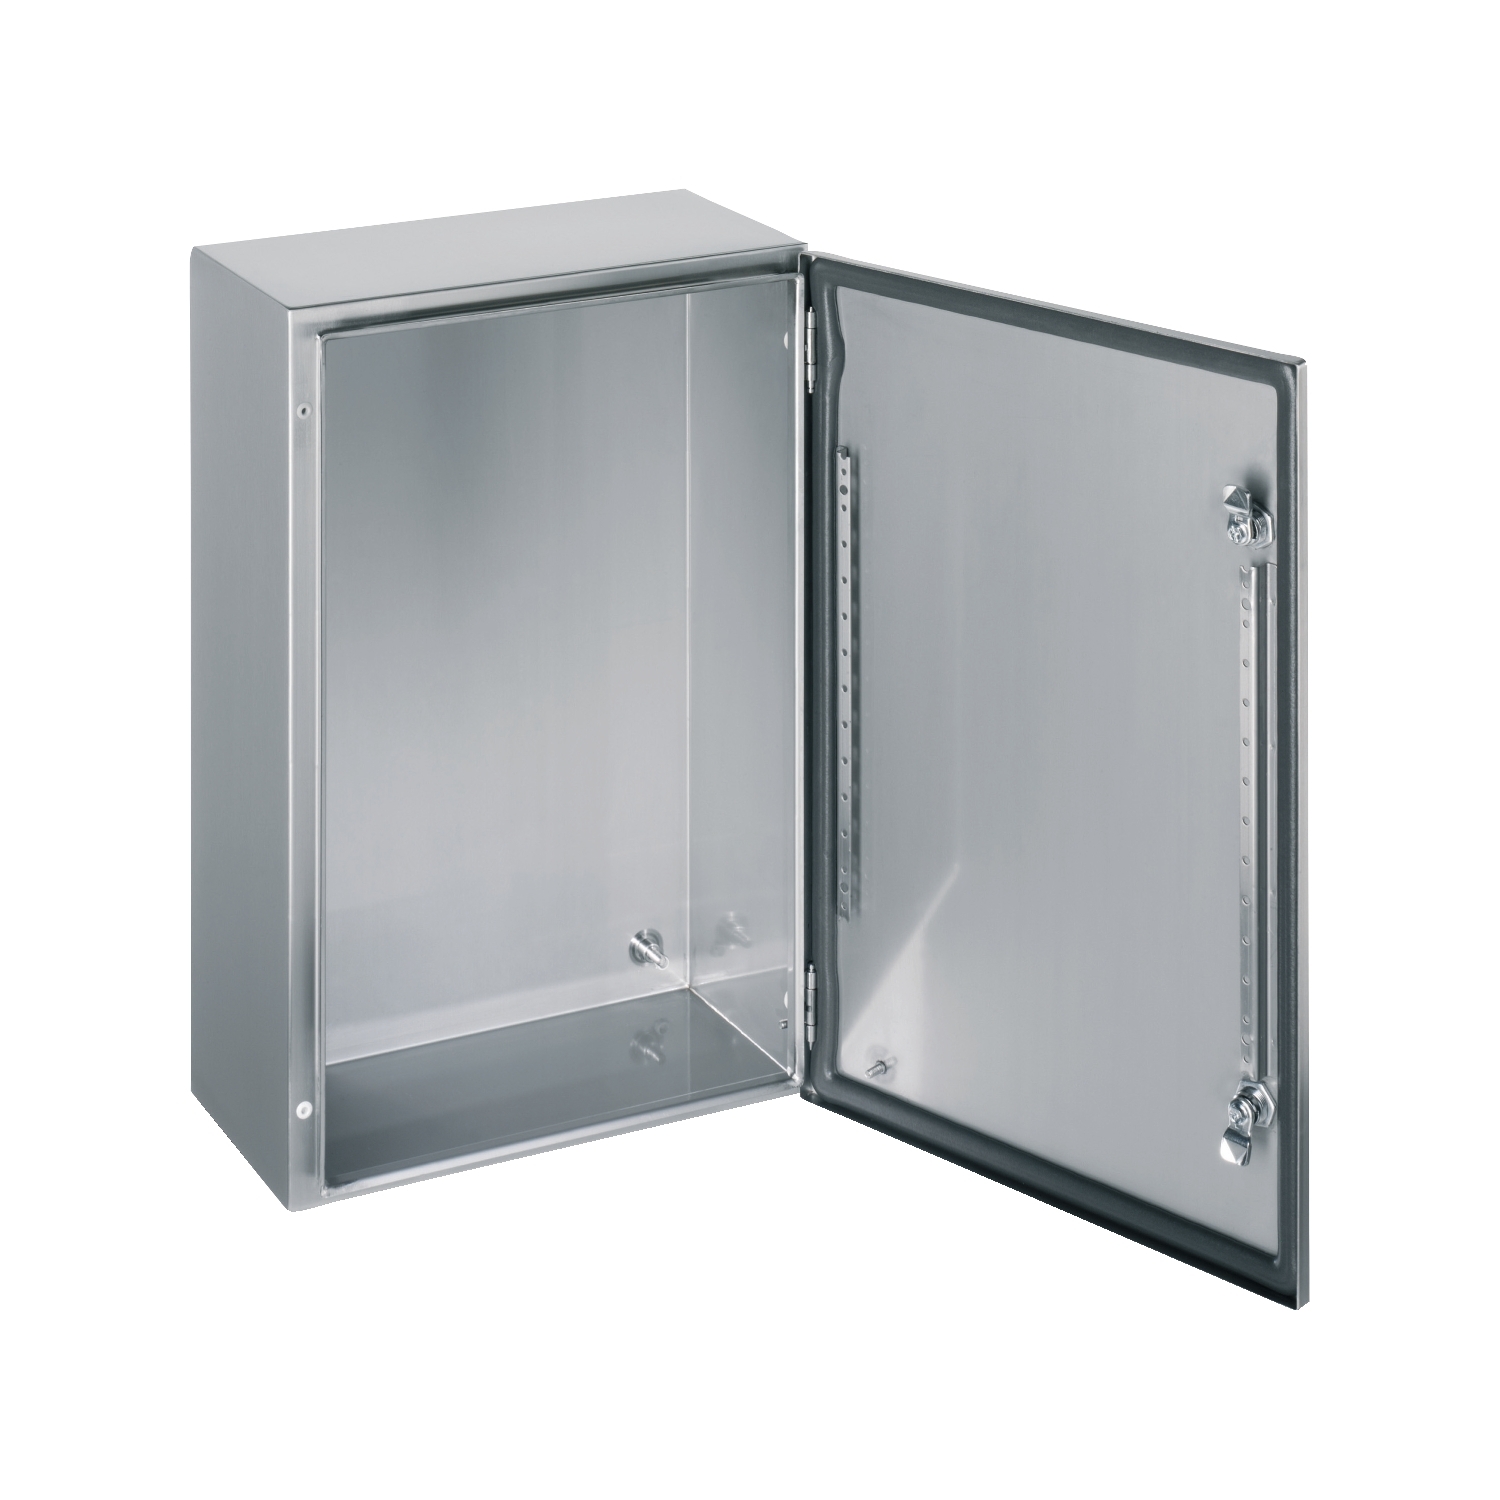 Wall mounted enclosure, Spacial S3X, stainless steel 316L, plain door, 400x300x150mm, IP66